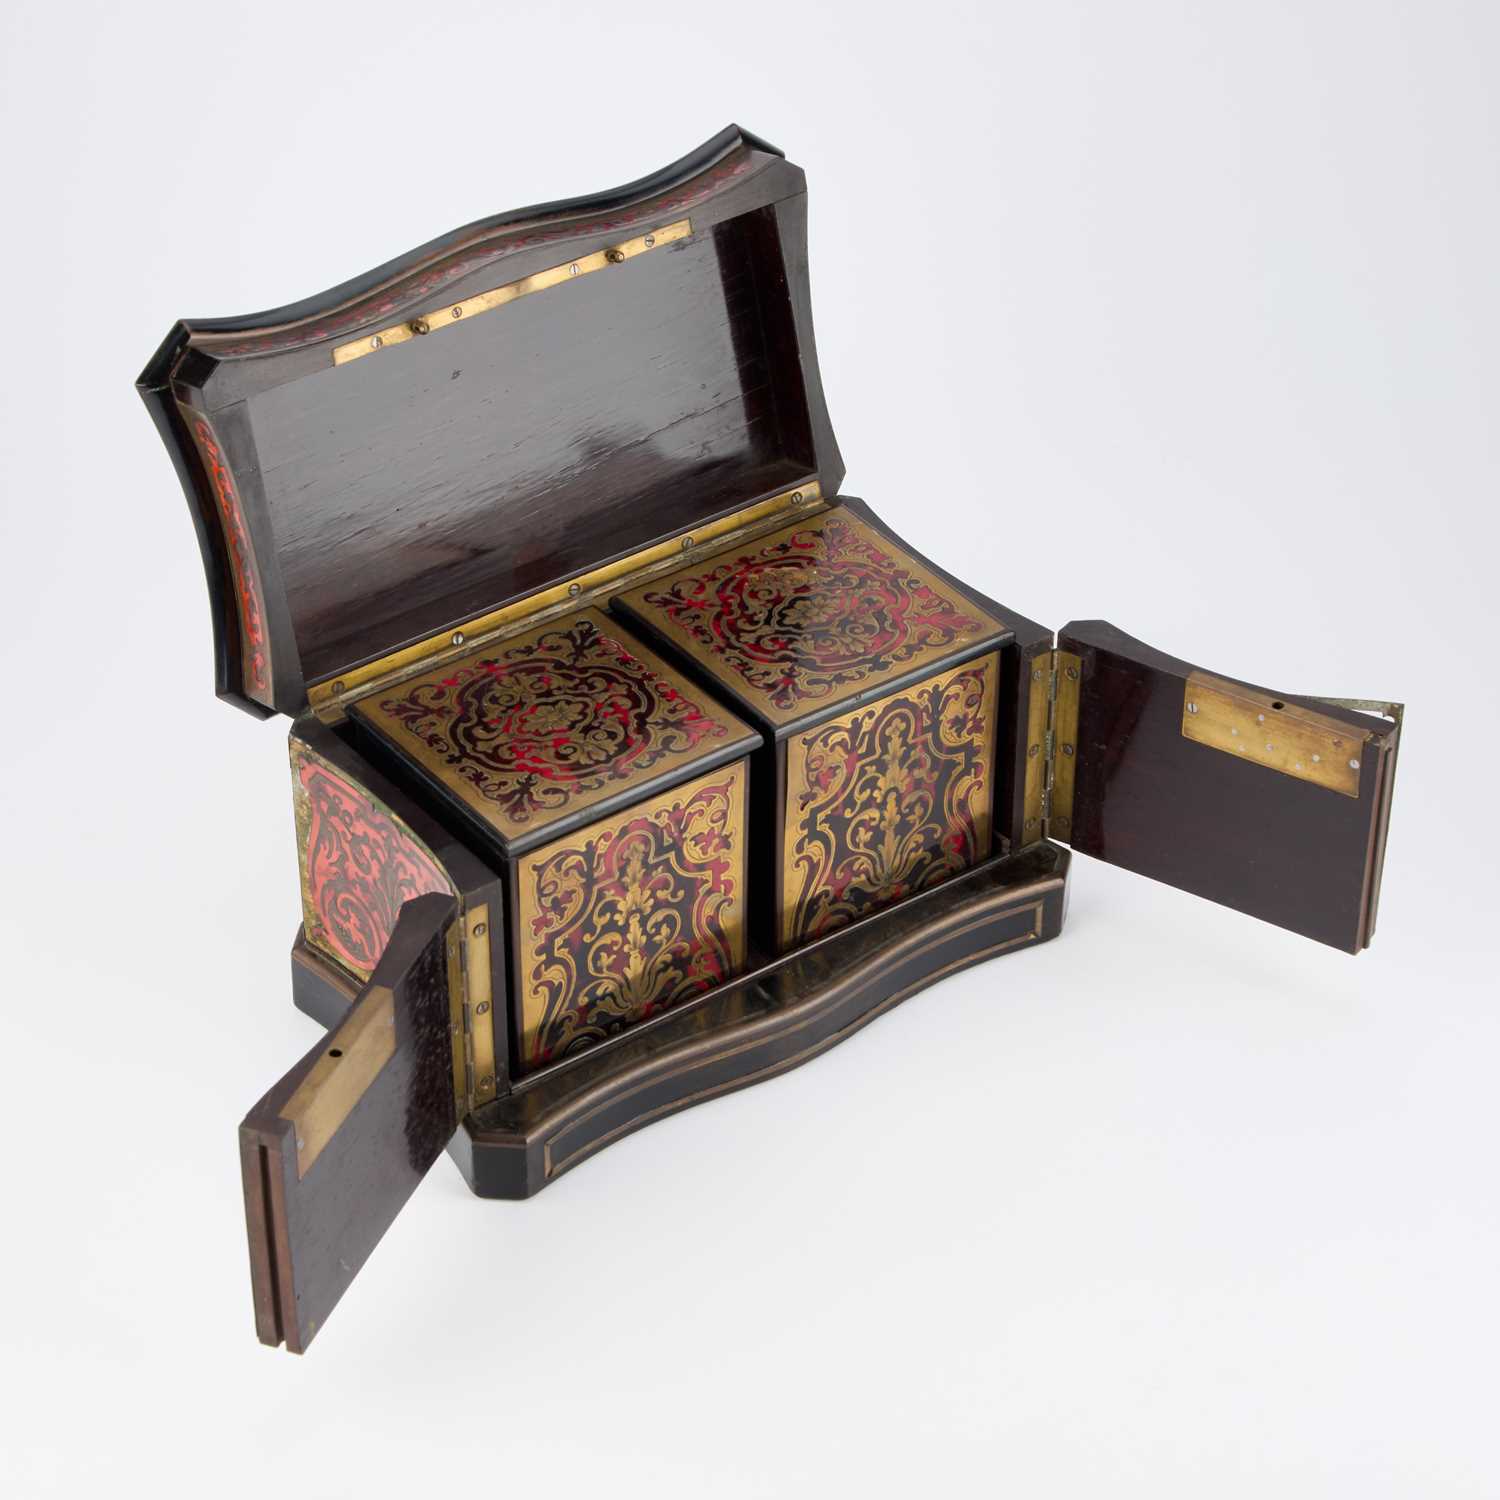 A MID-19TH CENTURY FRENCH 'BOULLE' TEA CADDY - Image 2 of 2